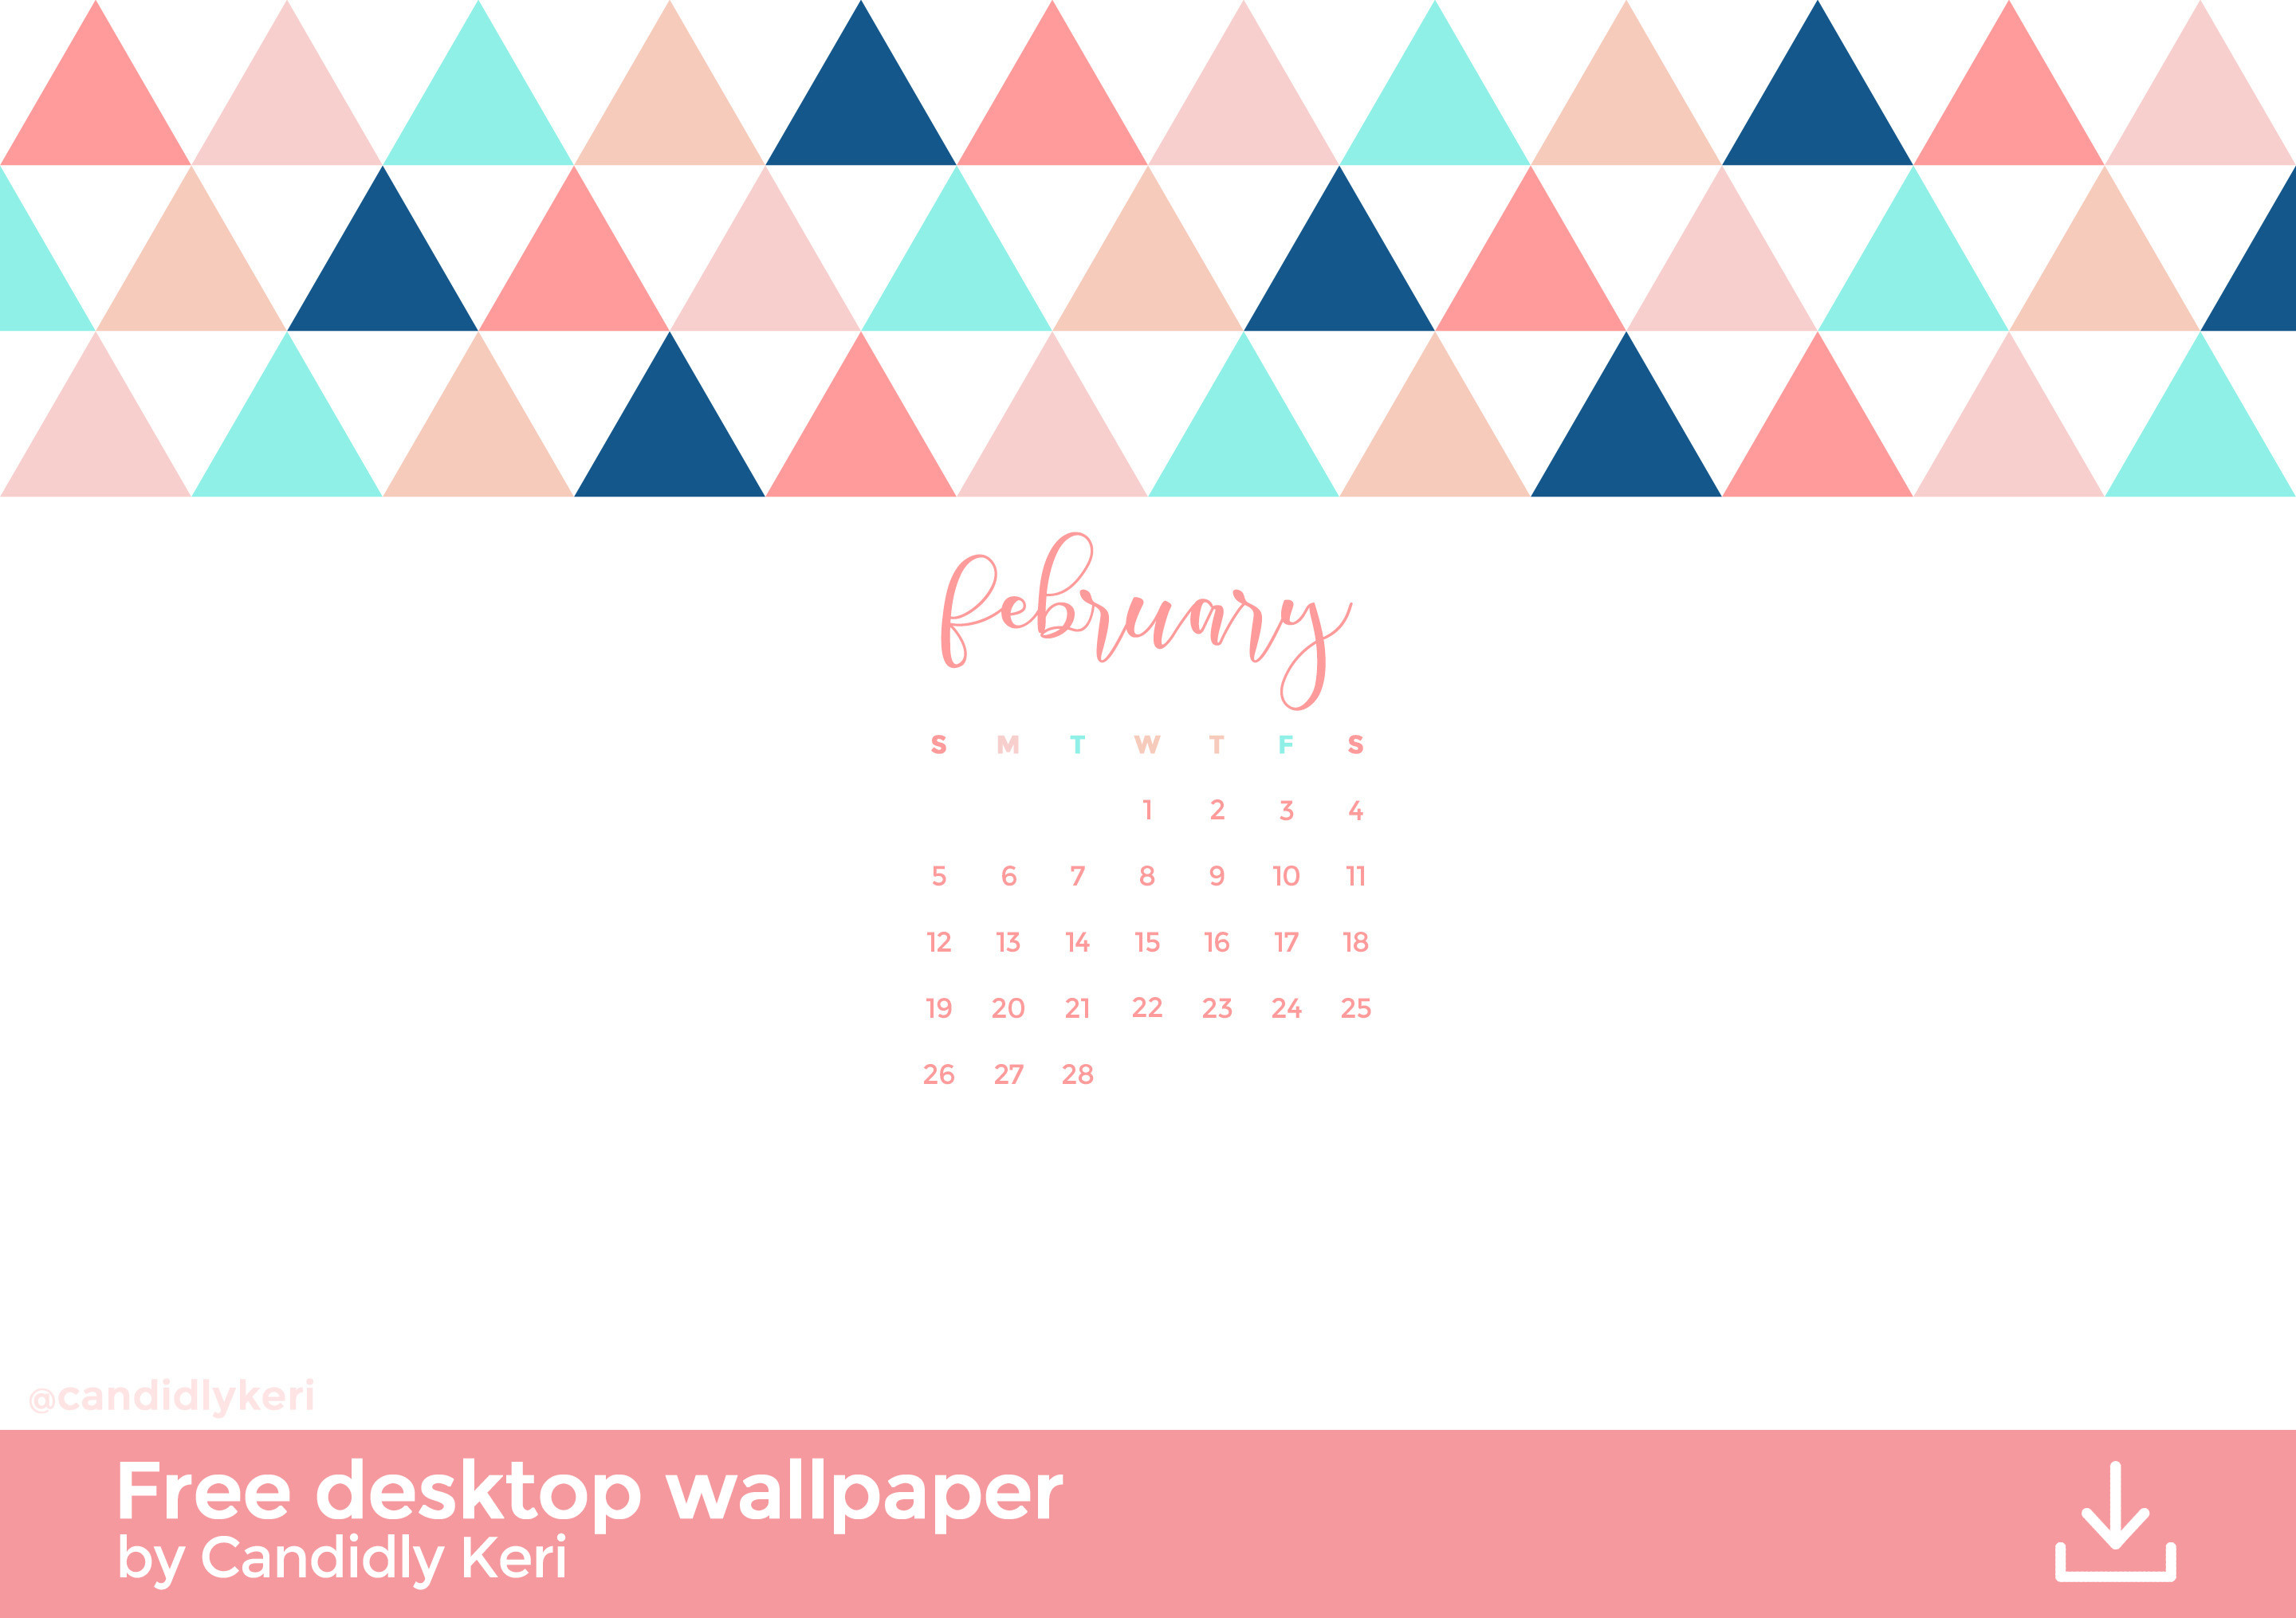 2880x2030 Pink Salmon navy blue turquoise triangle February calendar 2017 wallpaper  you can download for free on